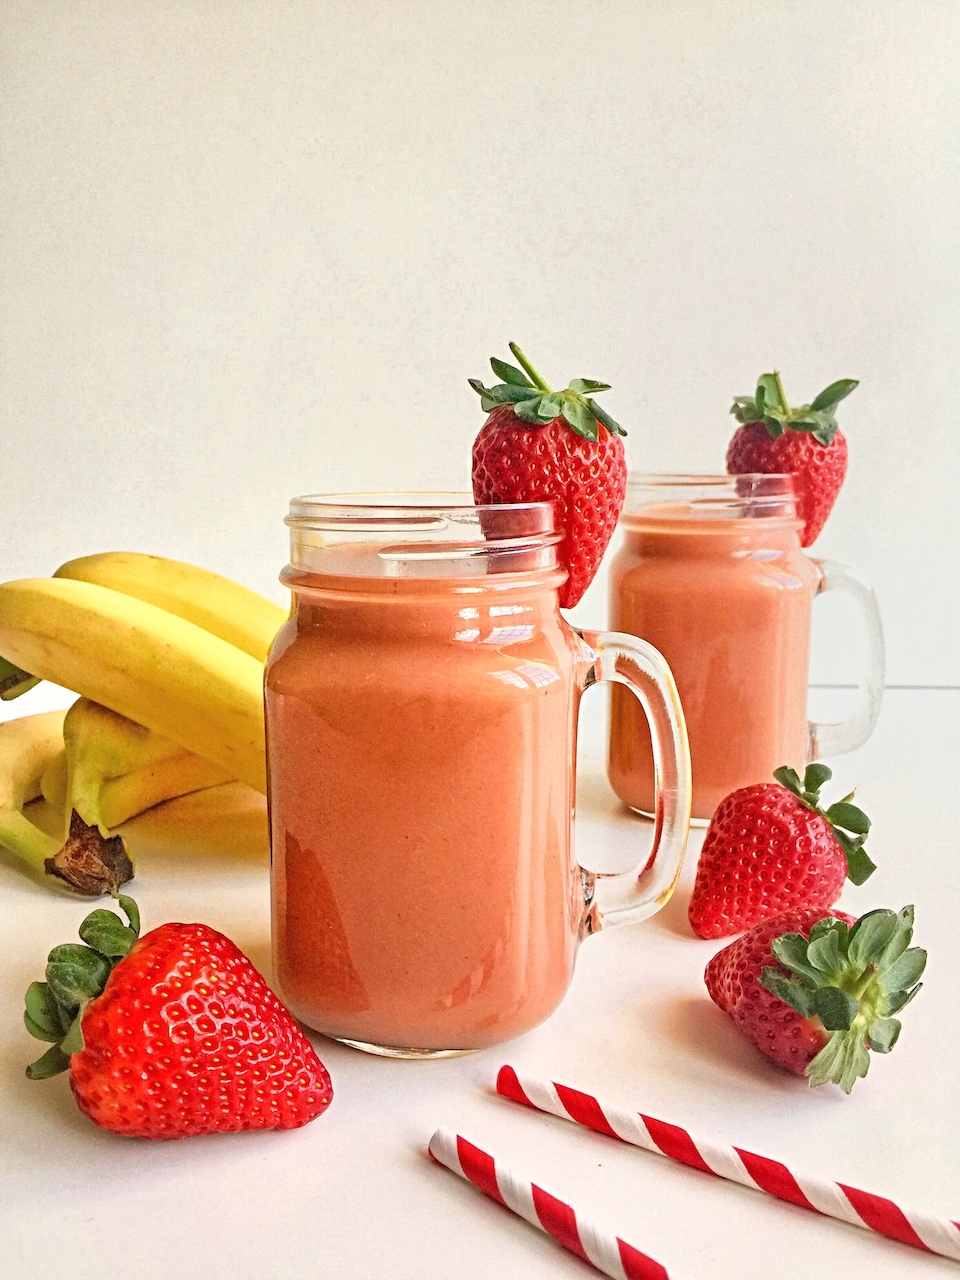 Strawberry banana smoothie made with real milk